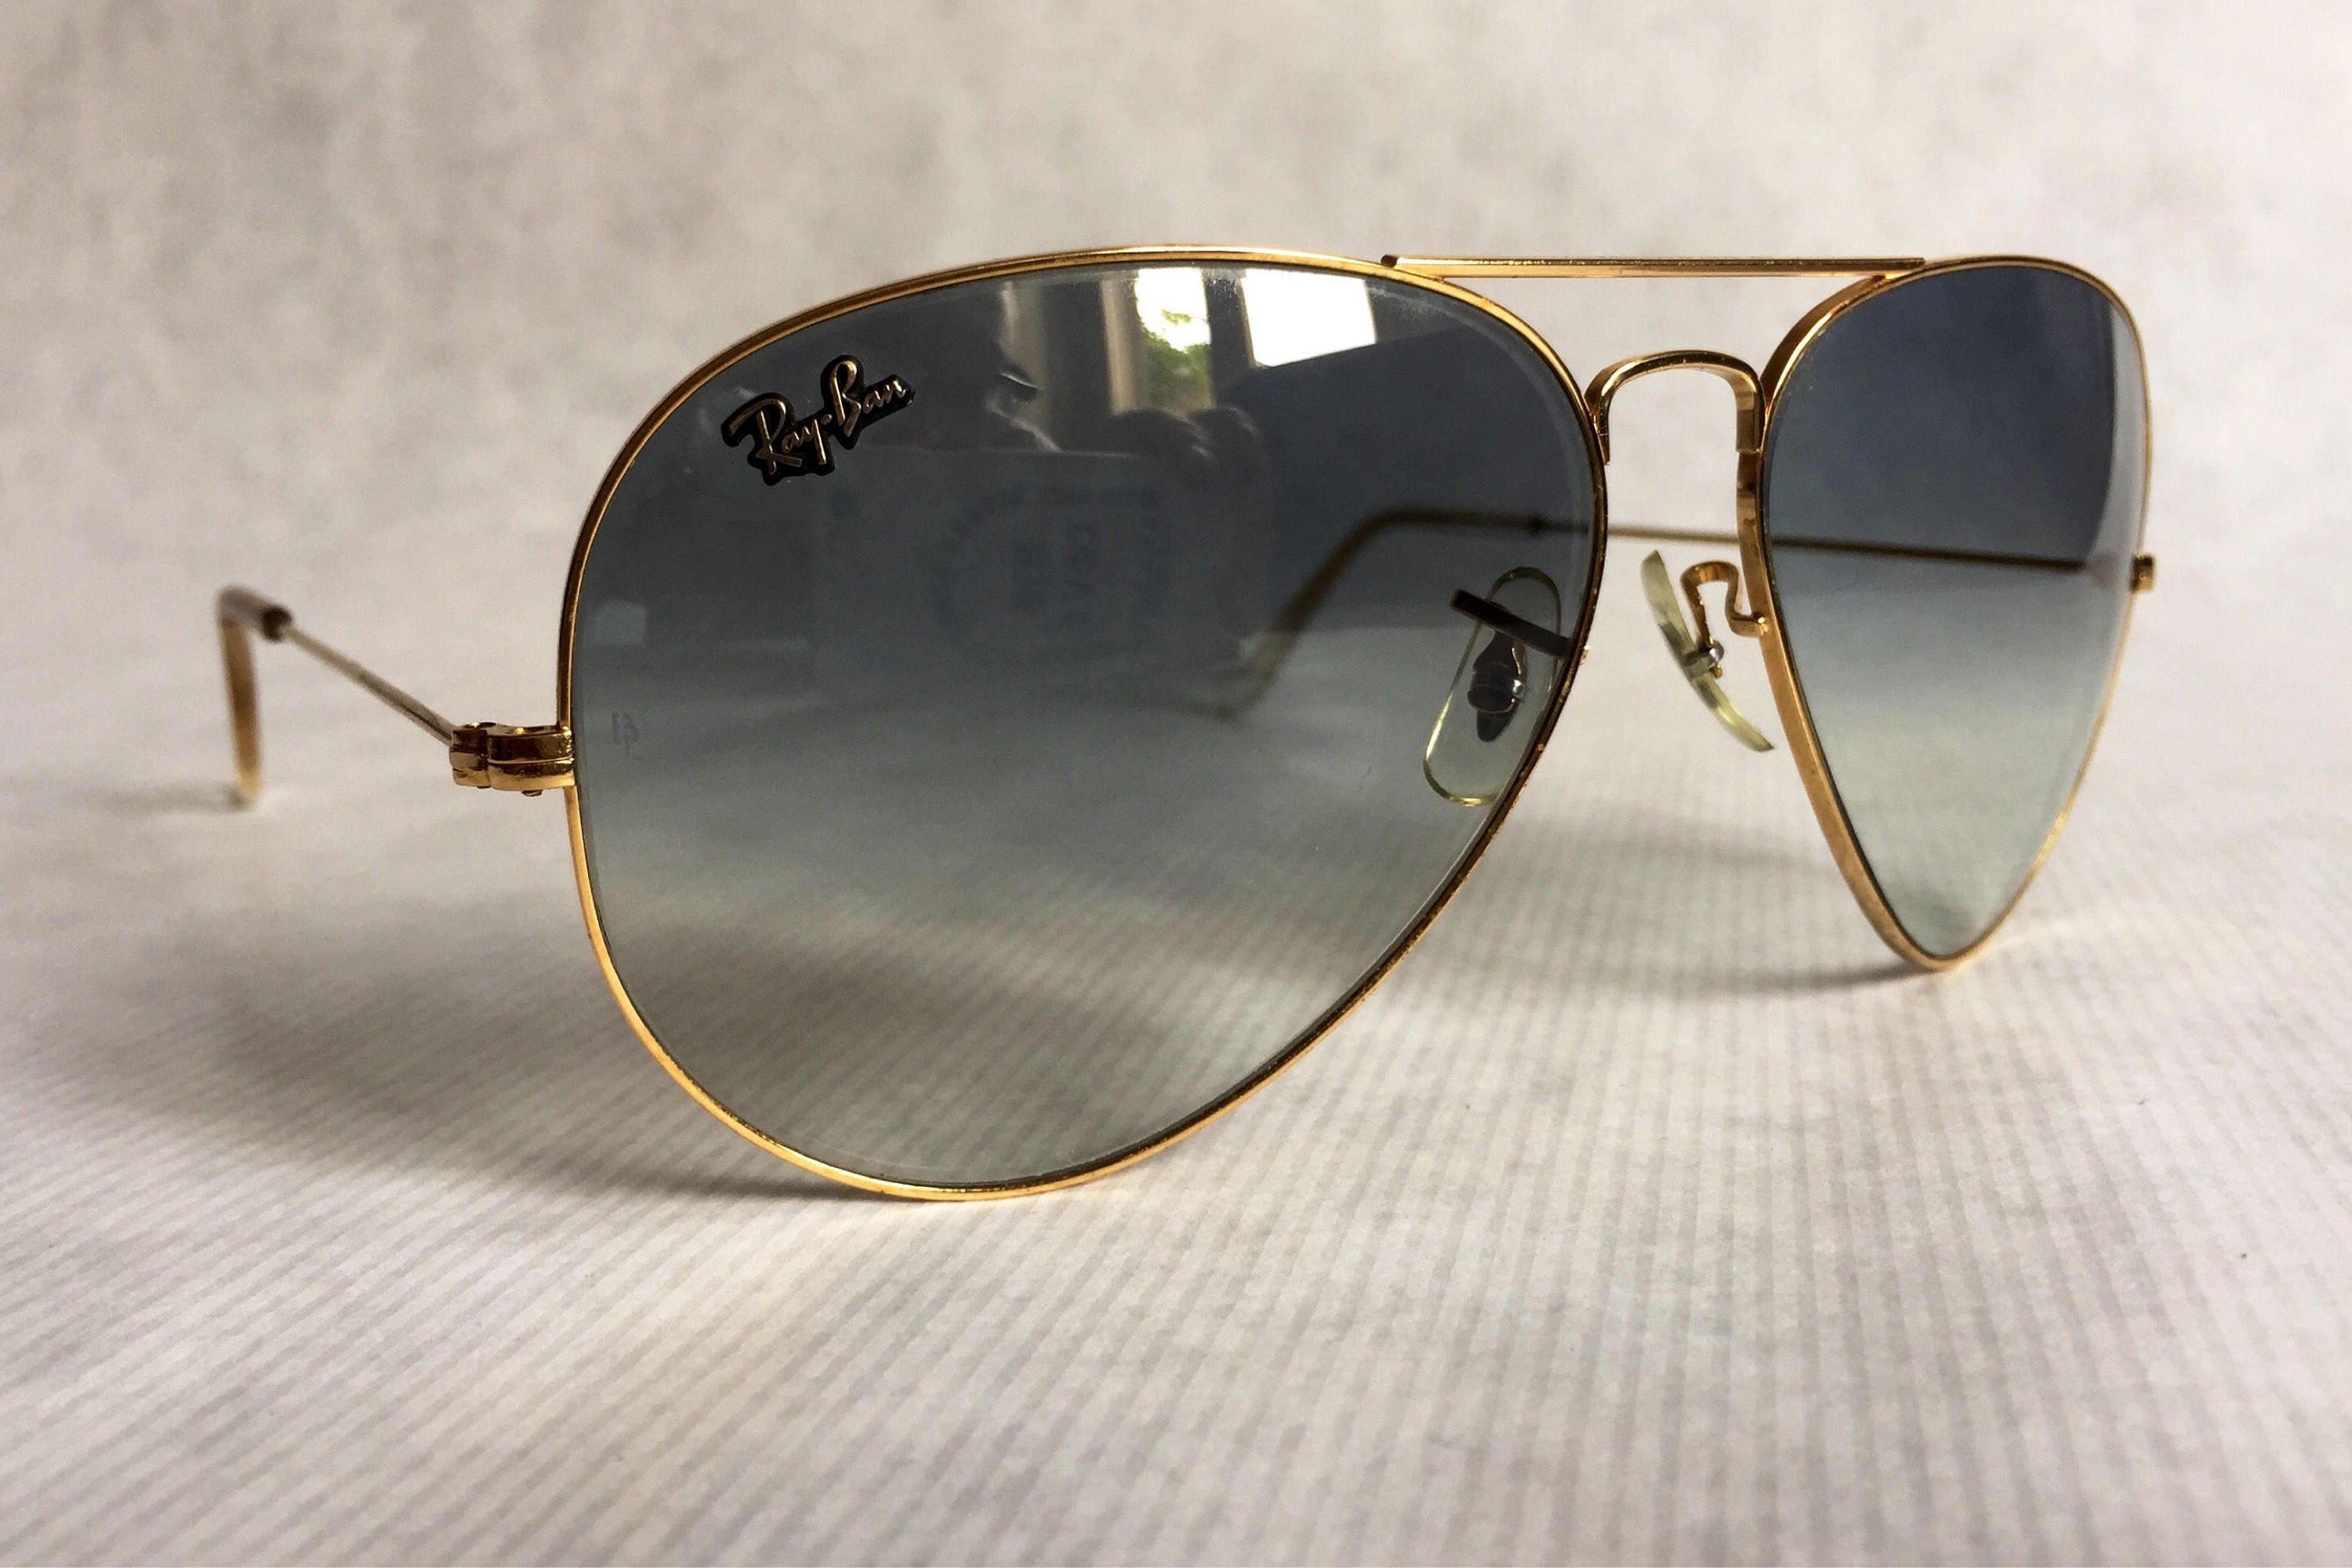 Ray-Ban by Bausch & Lomb Glacier Aviator Vintage Sunglasses New Unworn ...